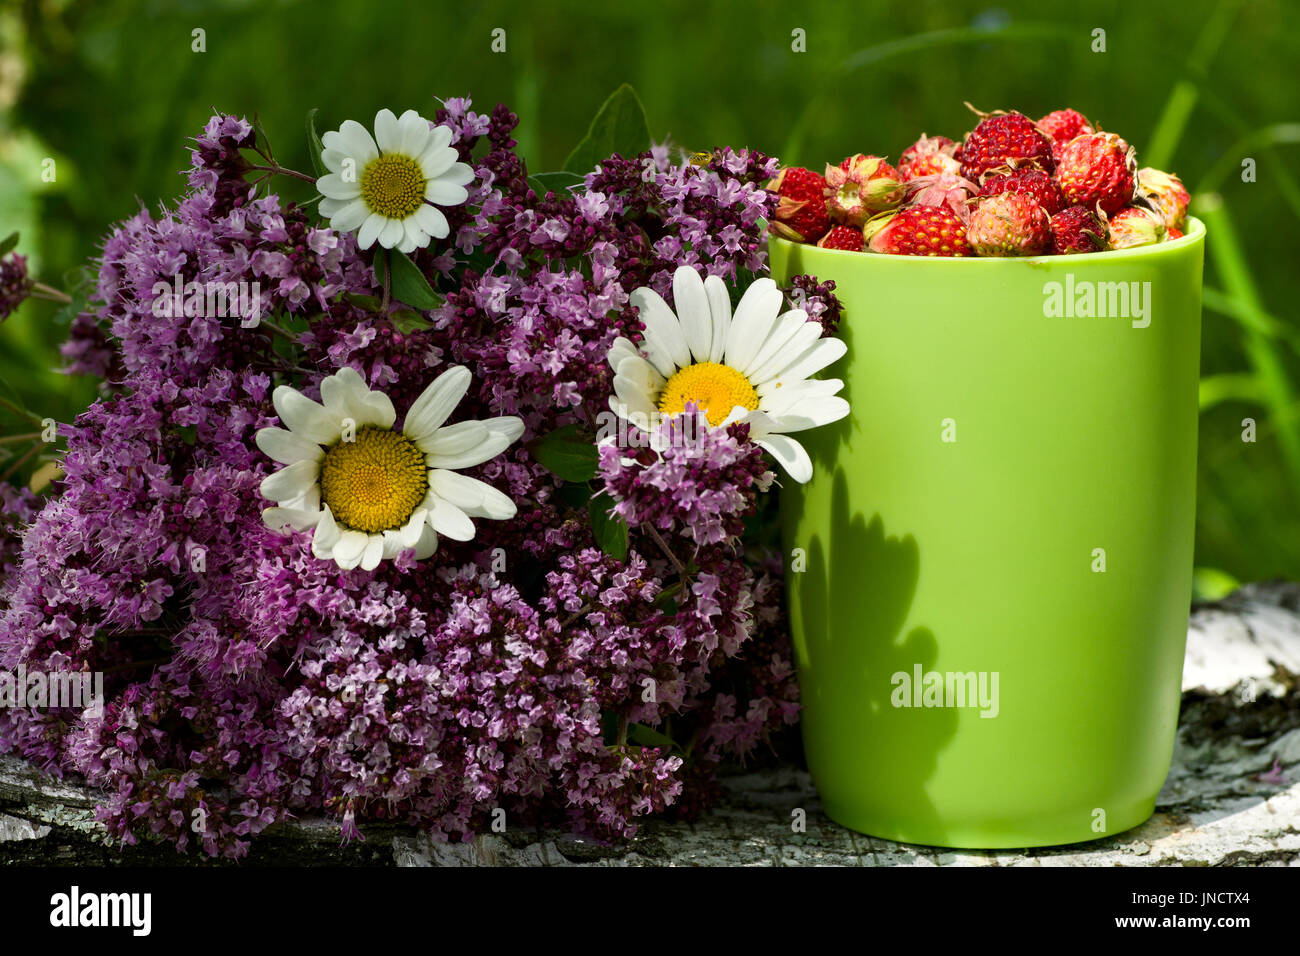 Herbs bouquet and cup full of wild strawberry Stock Photo